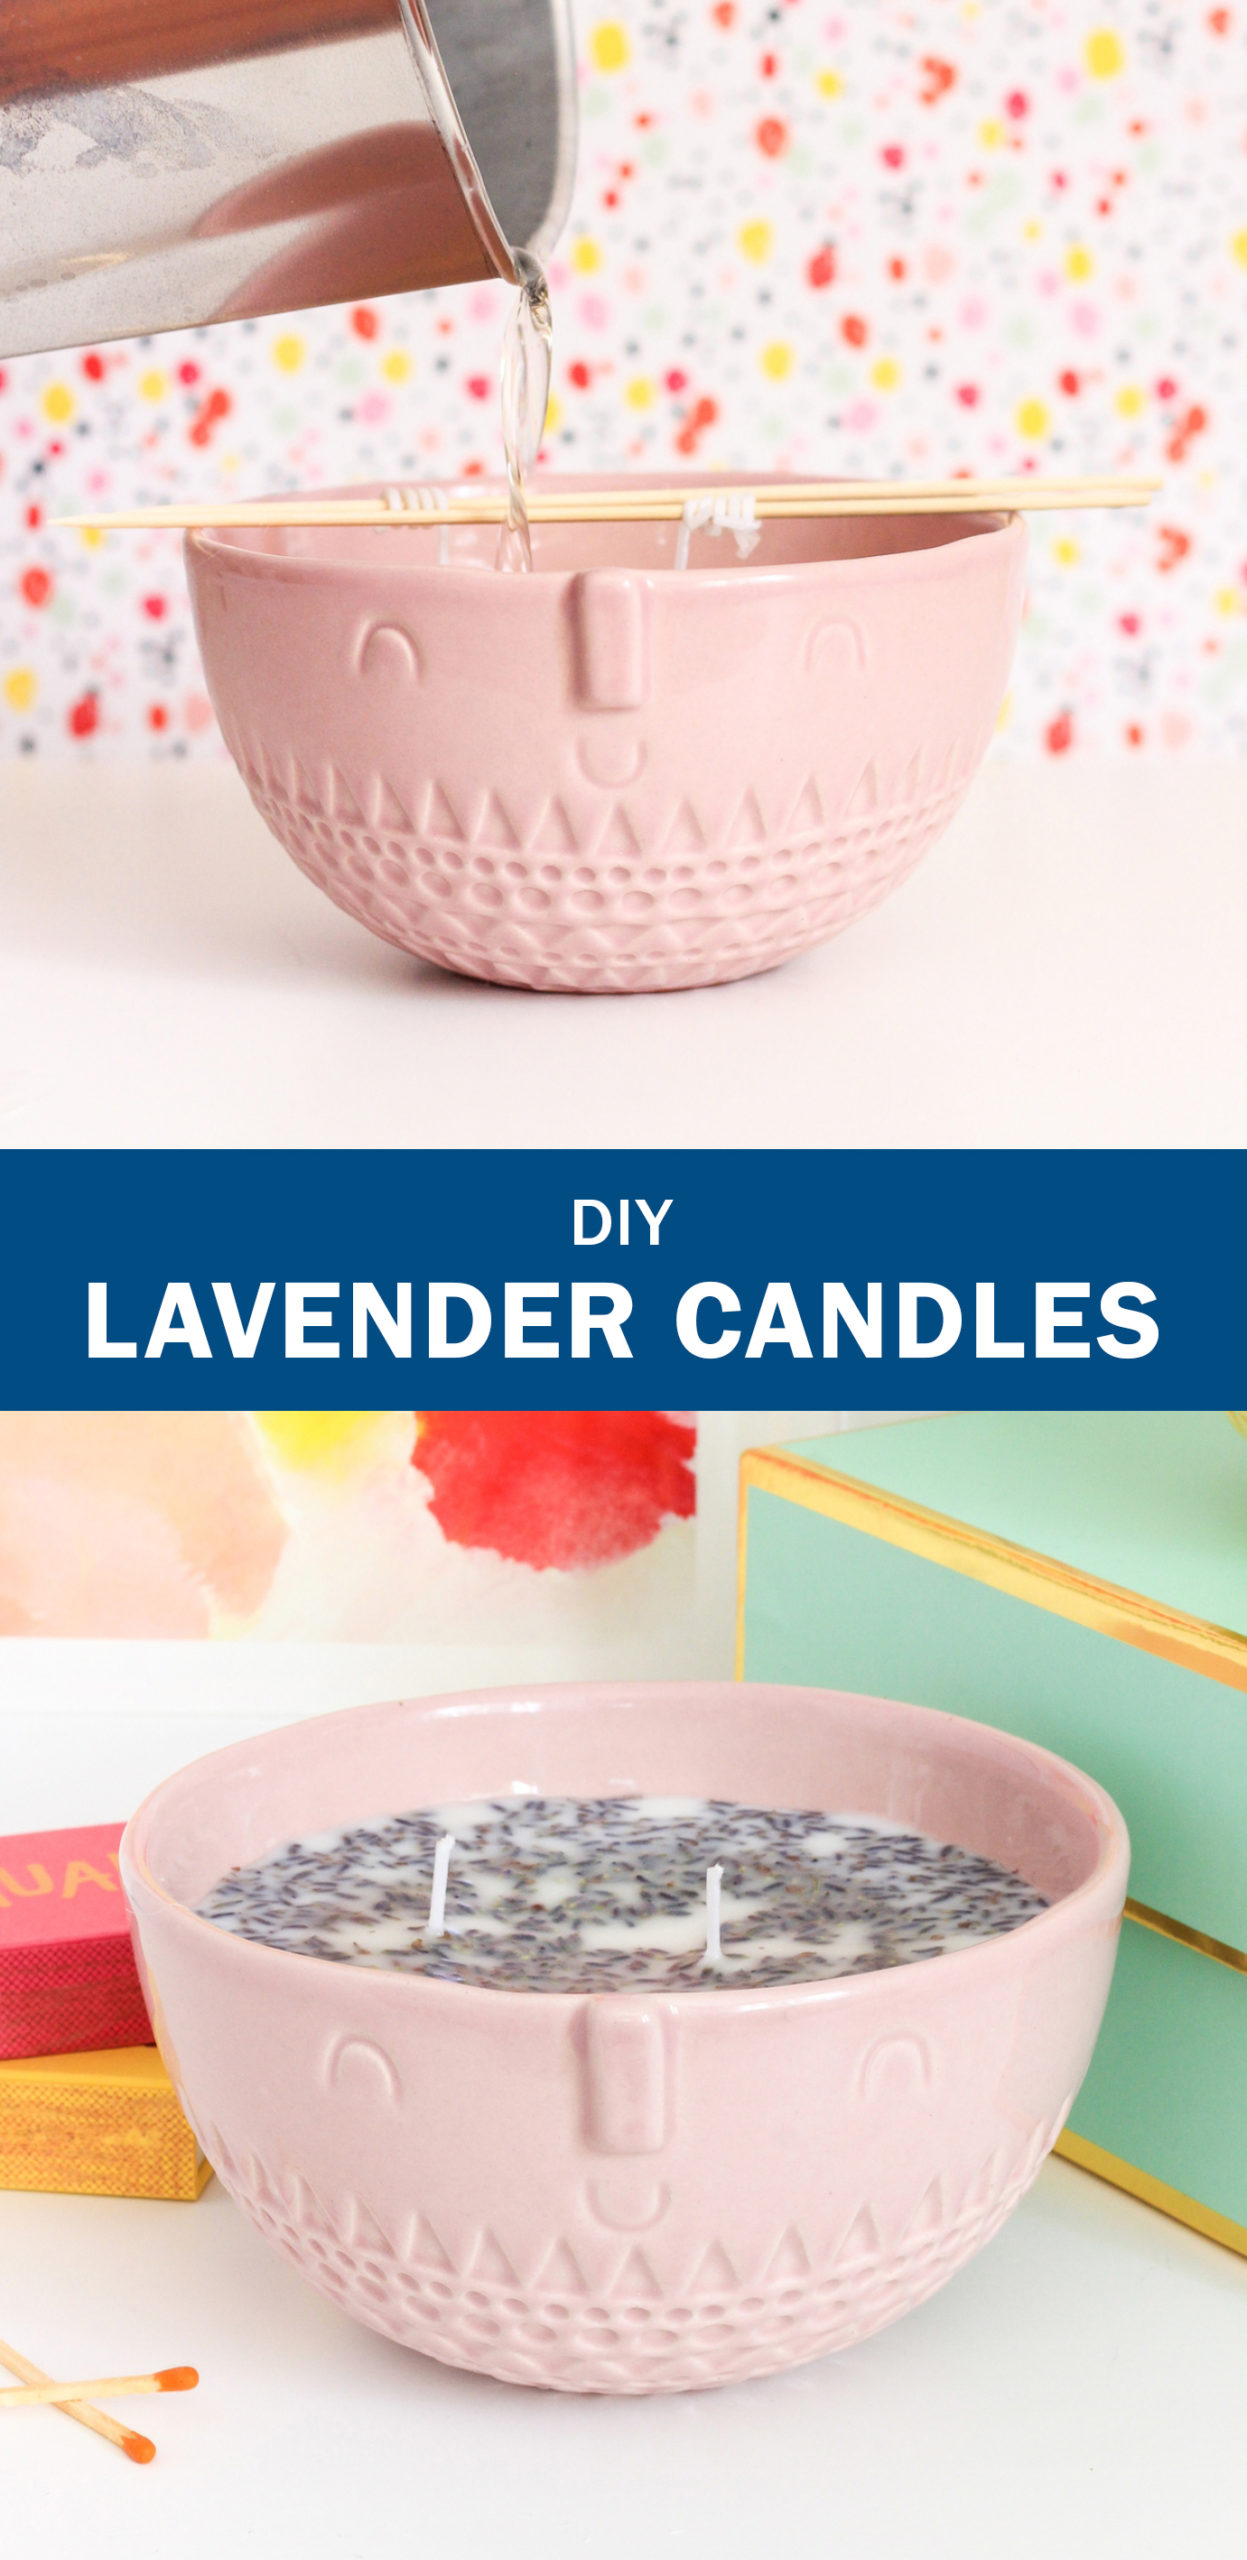 DIY Lavender candles are a great way to add calm to your home. And you can make your own candles in 30 minutes! A quick and easy craft that everyone should try!